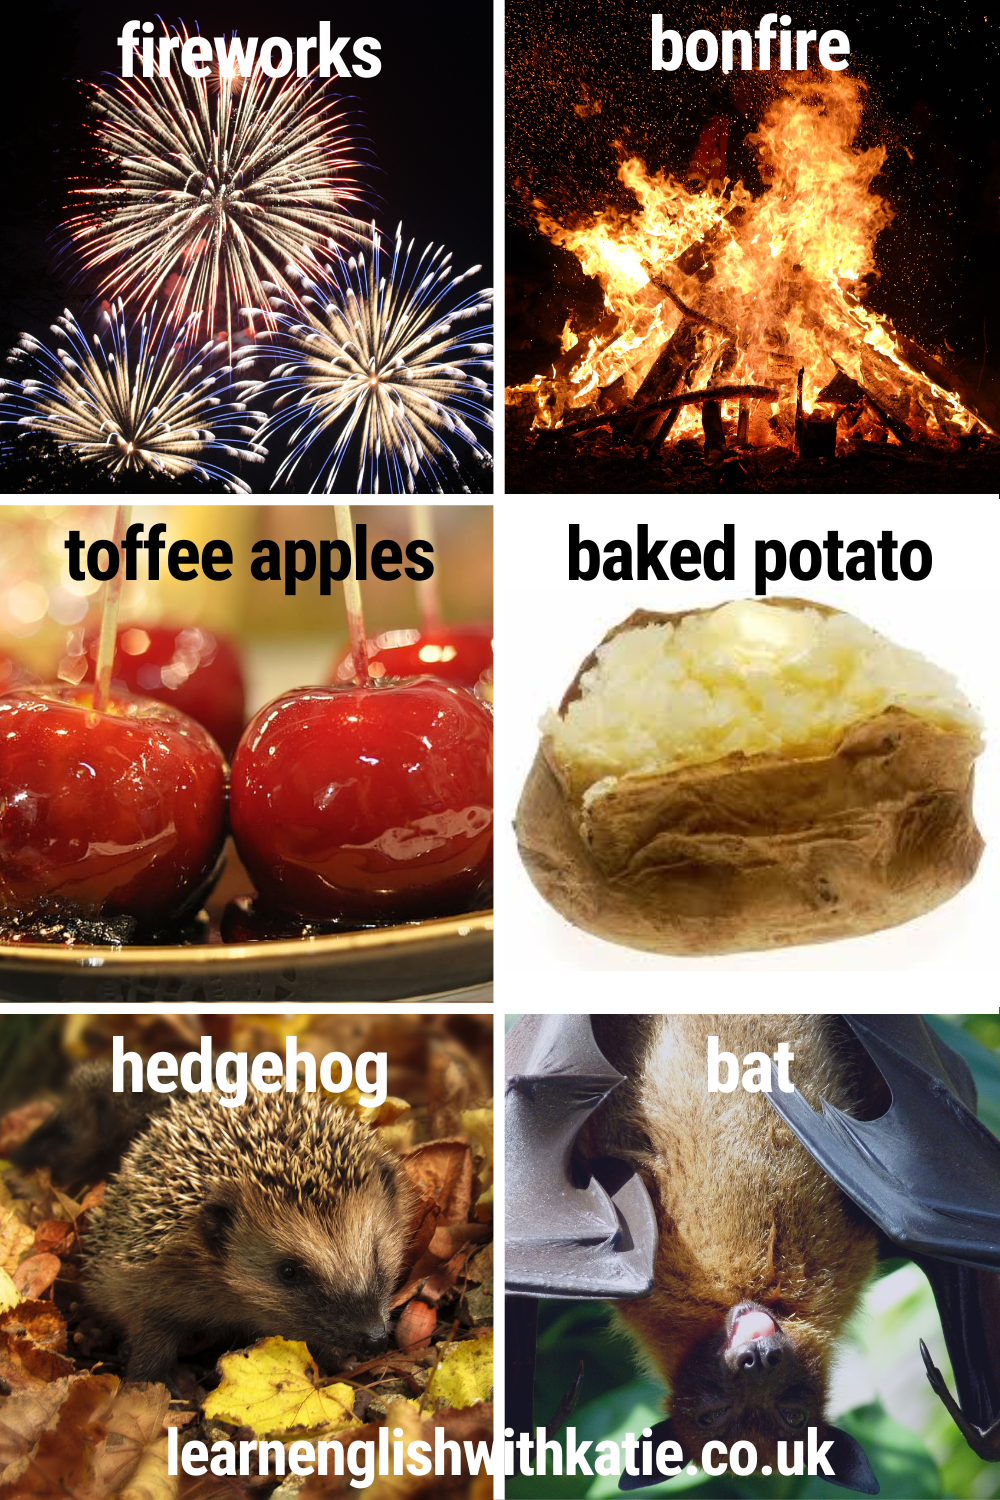 Picture dictionary showing fireworks, bonfire, toffee apples, baked potato, a hedgehog and a bat